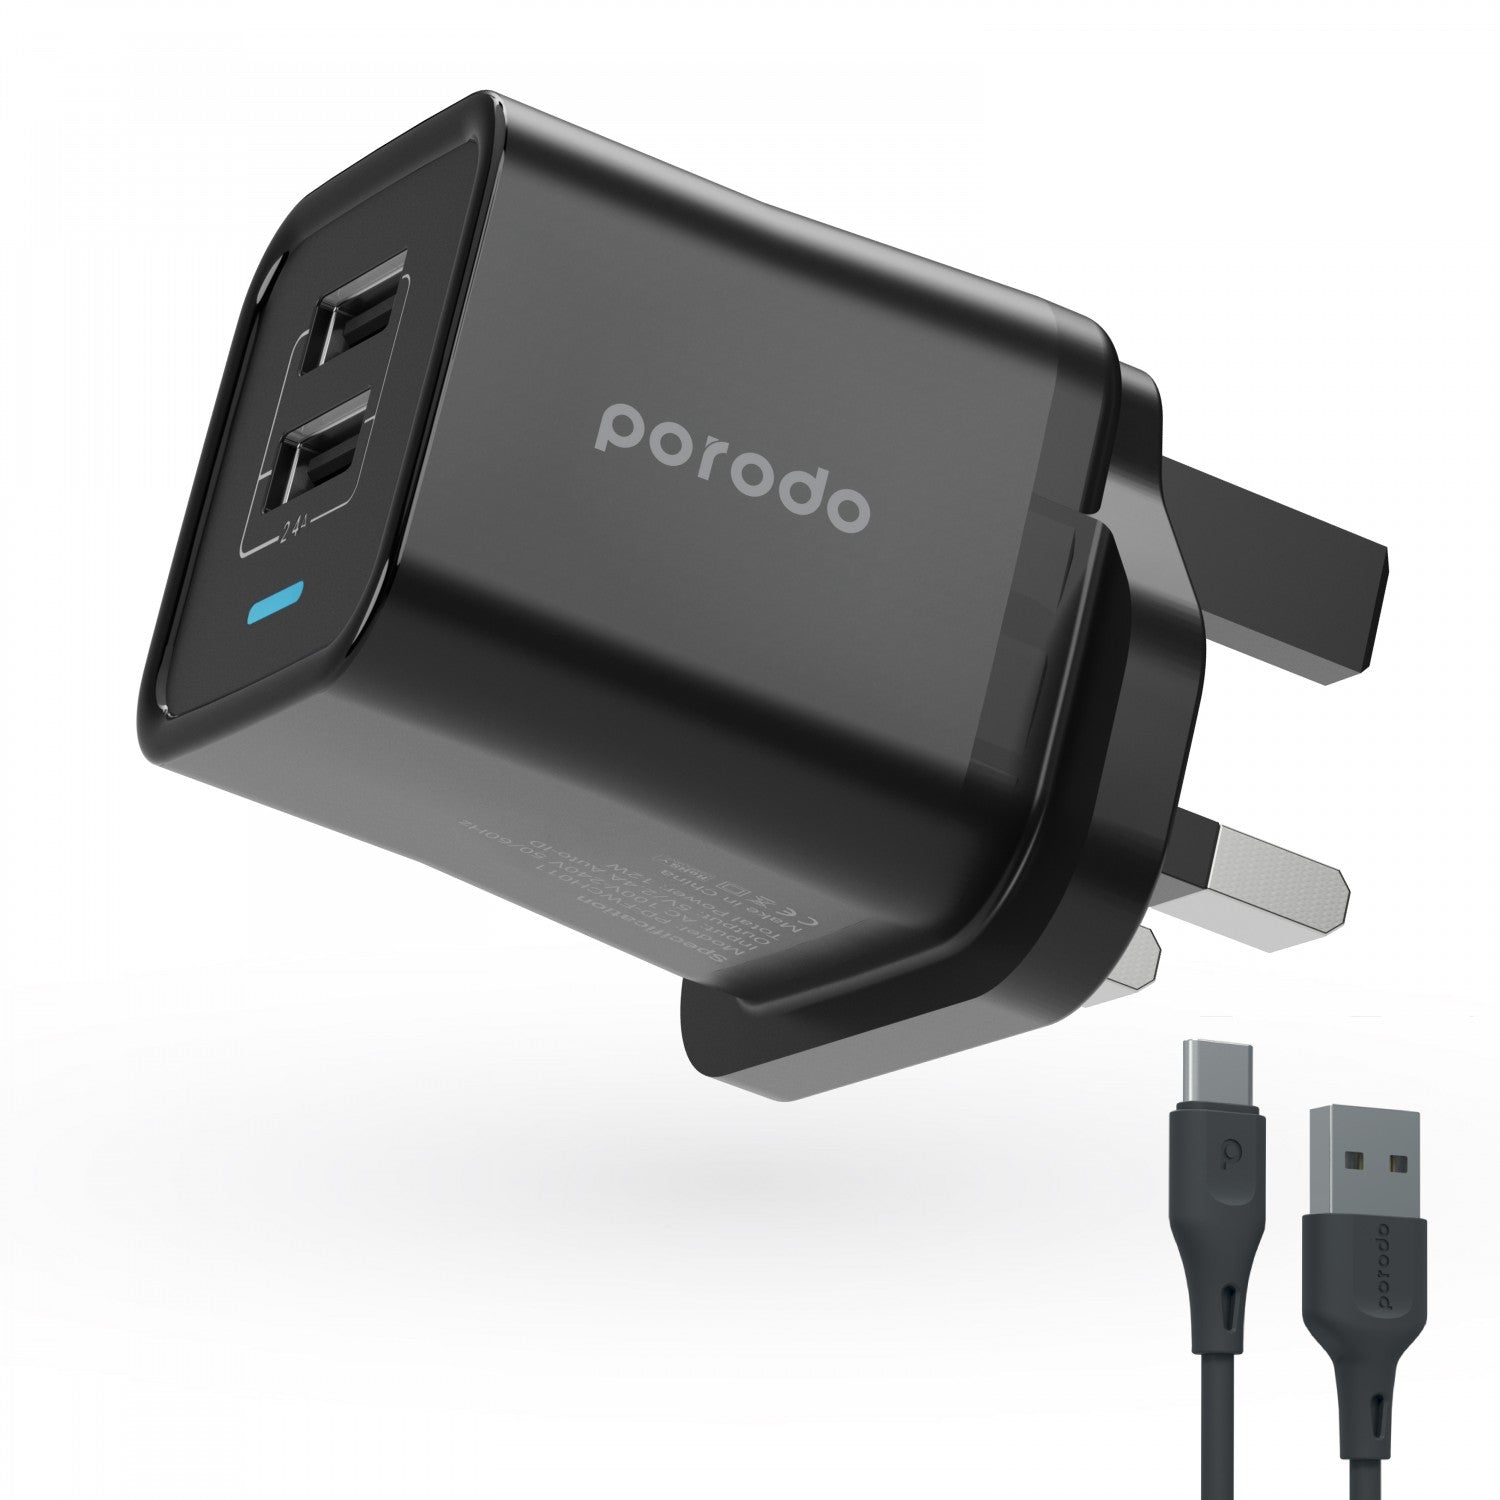 Porodo Dual Port Wall Charger 2.4A With 1.2m Type-C Cable - Black - GHI6